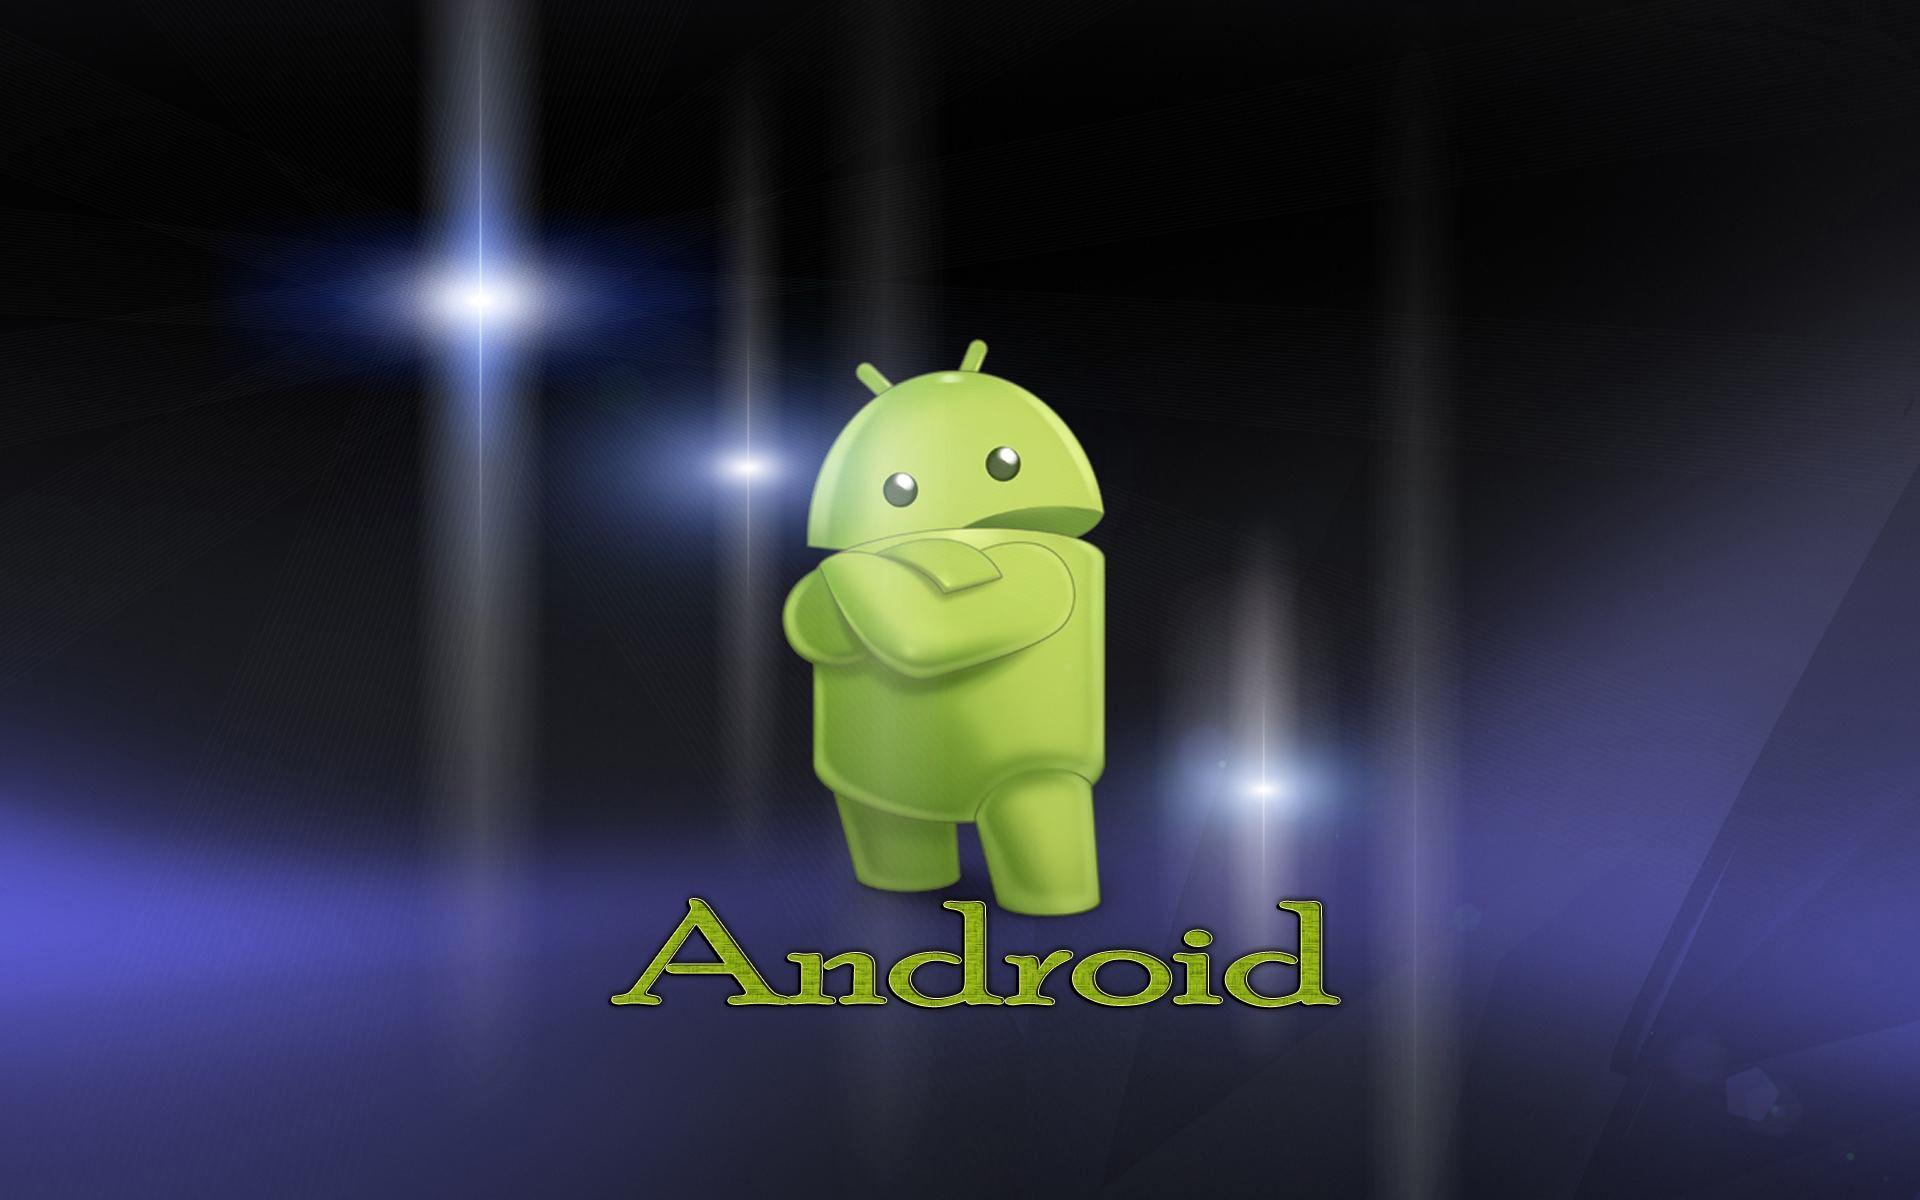 Android brand logo Wallpaper. High Quality Collection Wallpaper